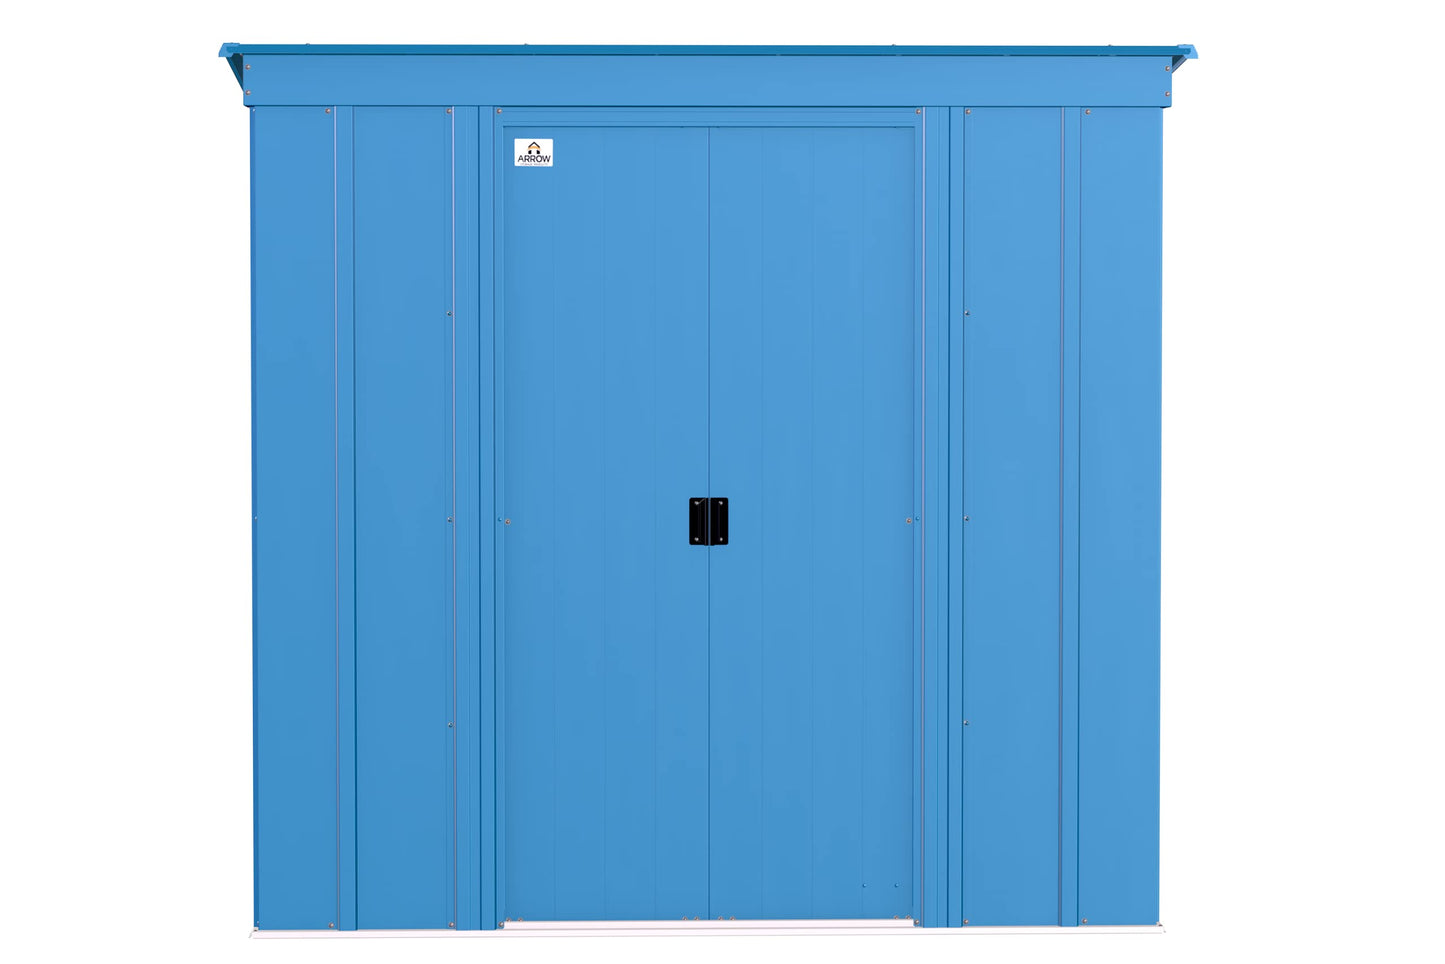 Arrow Shed Classic 6' x 4' Outdoor Padlockable Steel Storage Shed Building Blue Grey 6' x 4'